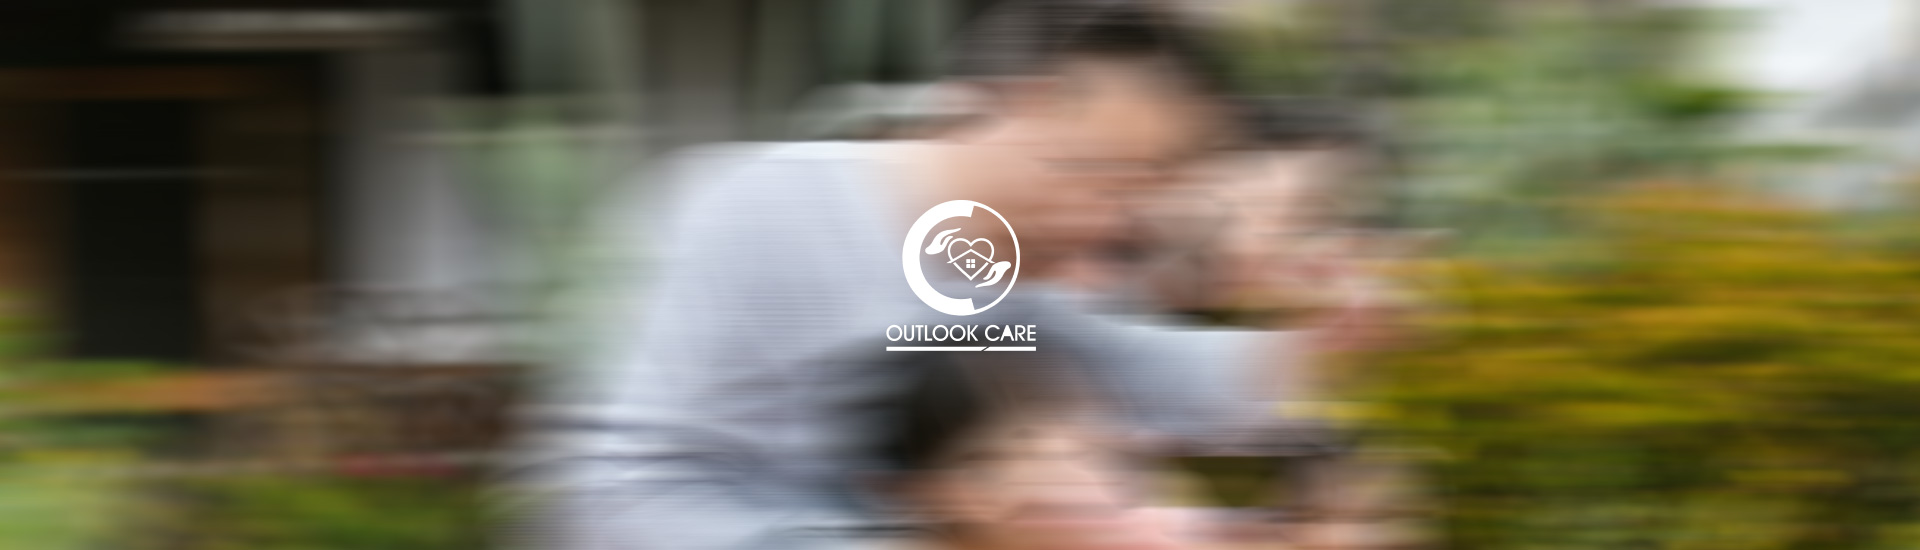 Outlook Care